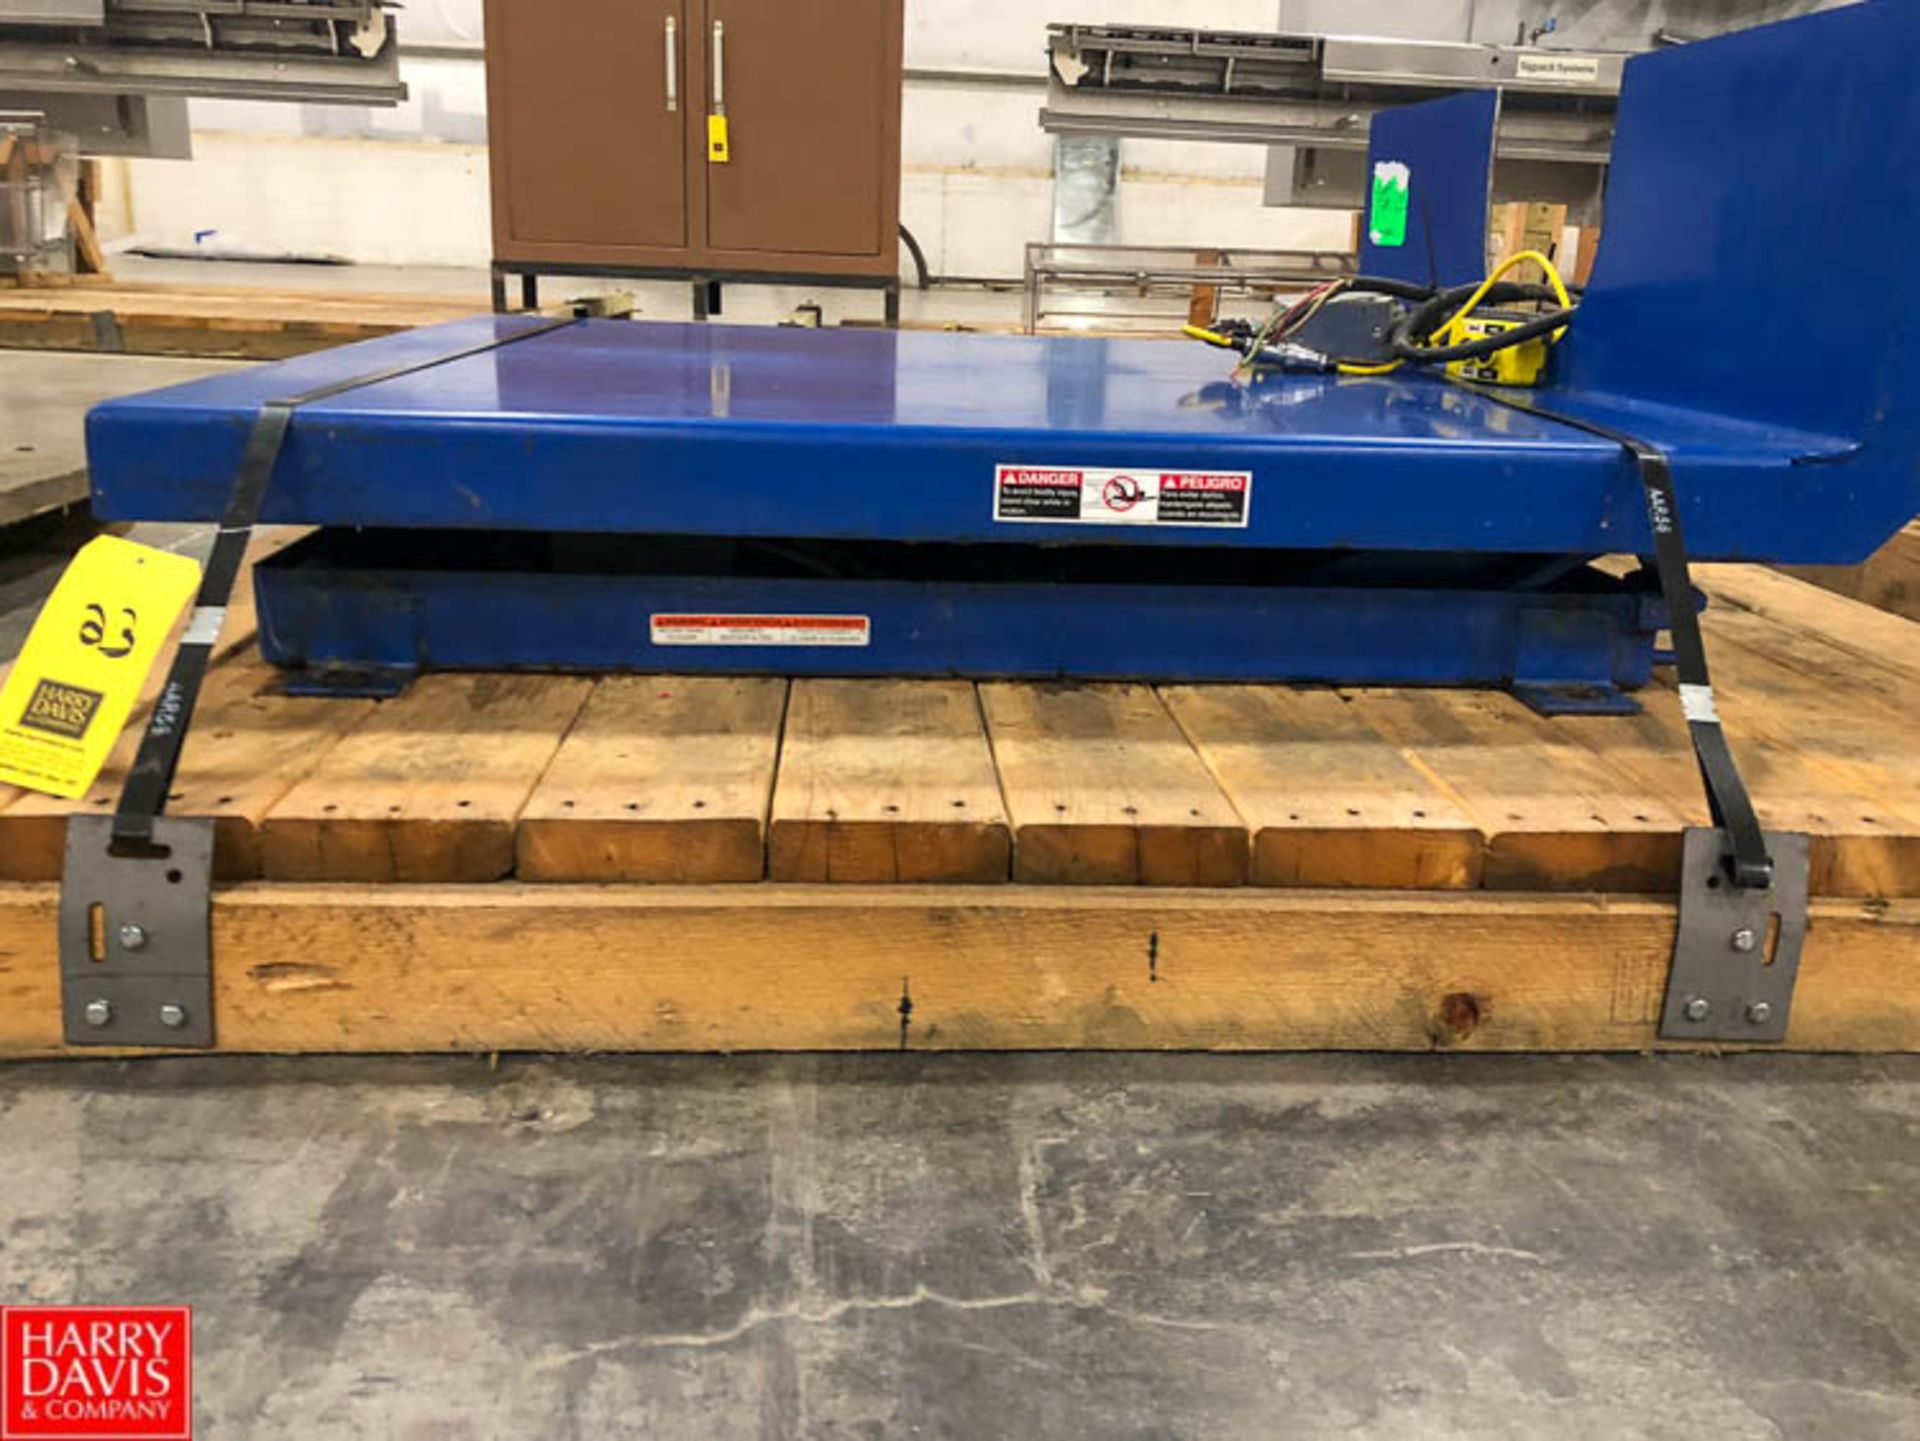 Hydraulic Tote Lifter, 2,500 LB Capacity Rigging Fee: $75 - Image 2 of 2